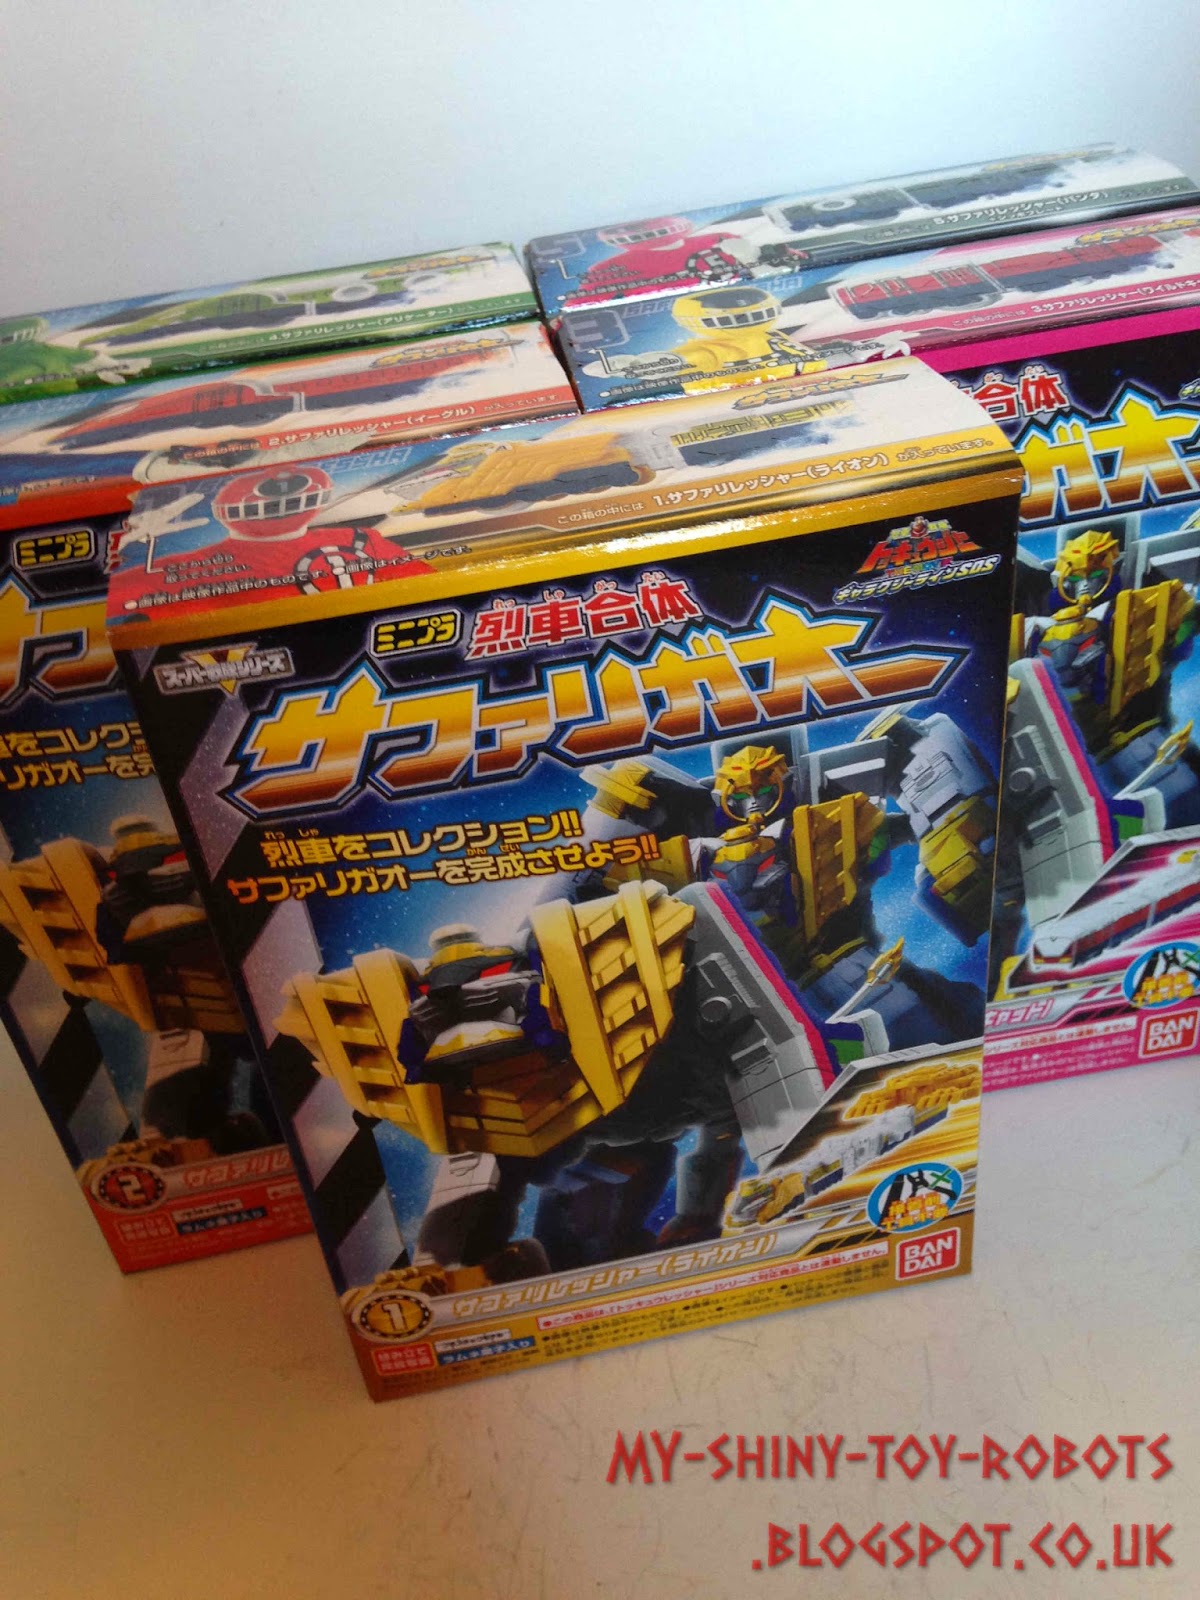 The five model kits in their boxes